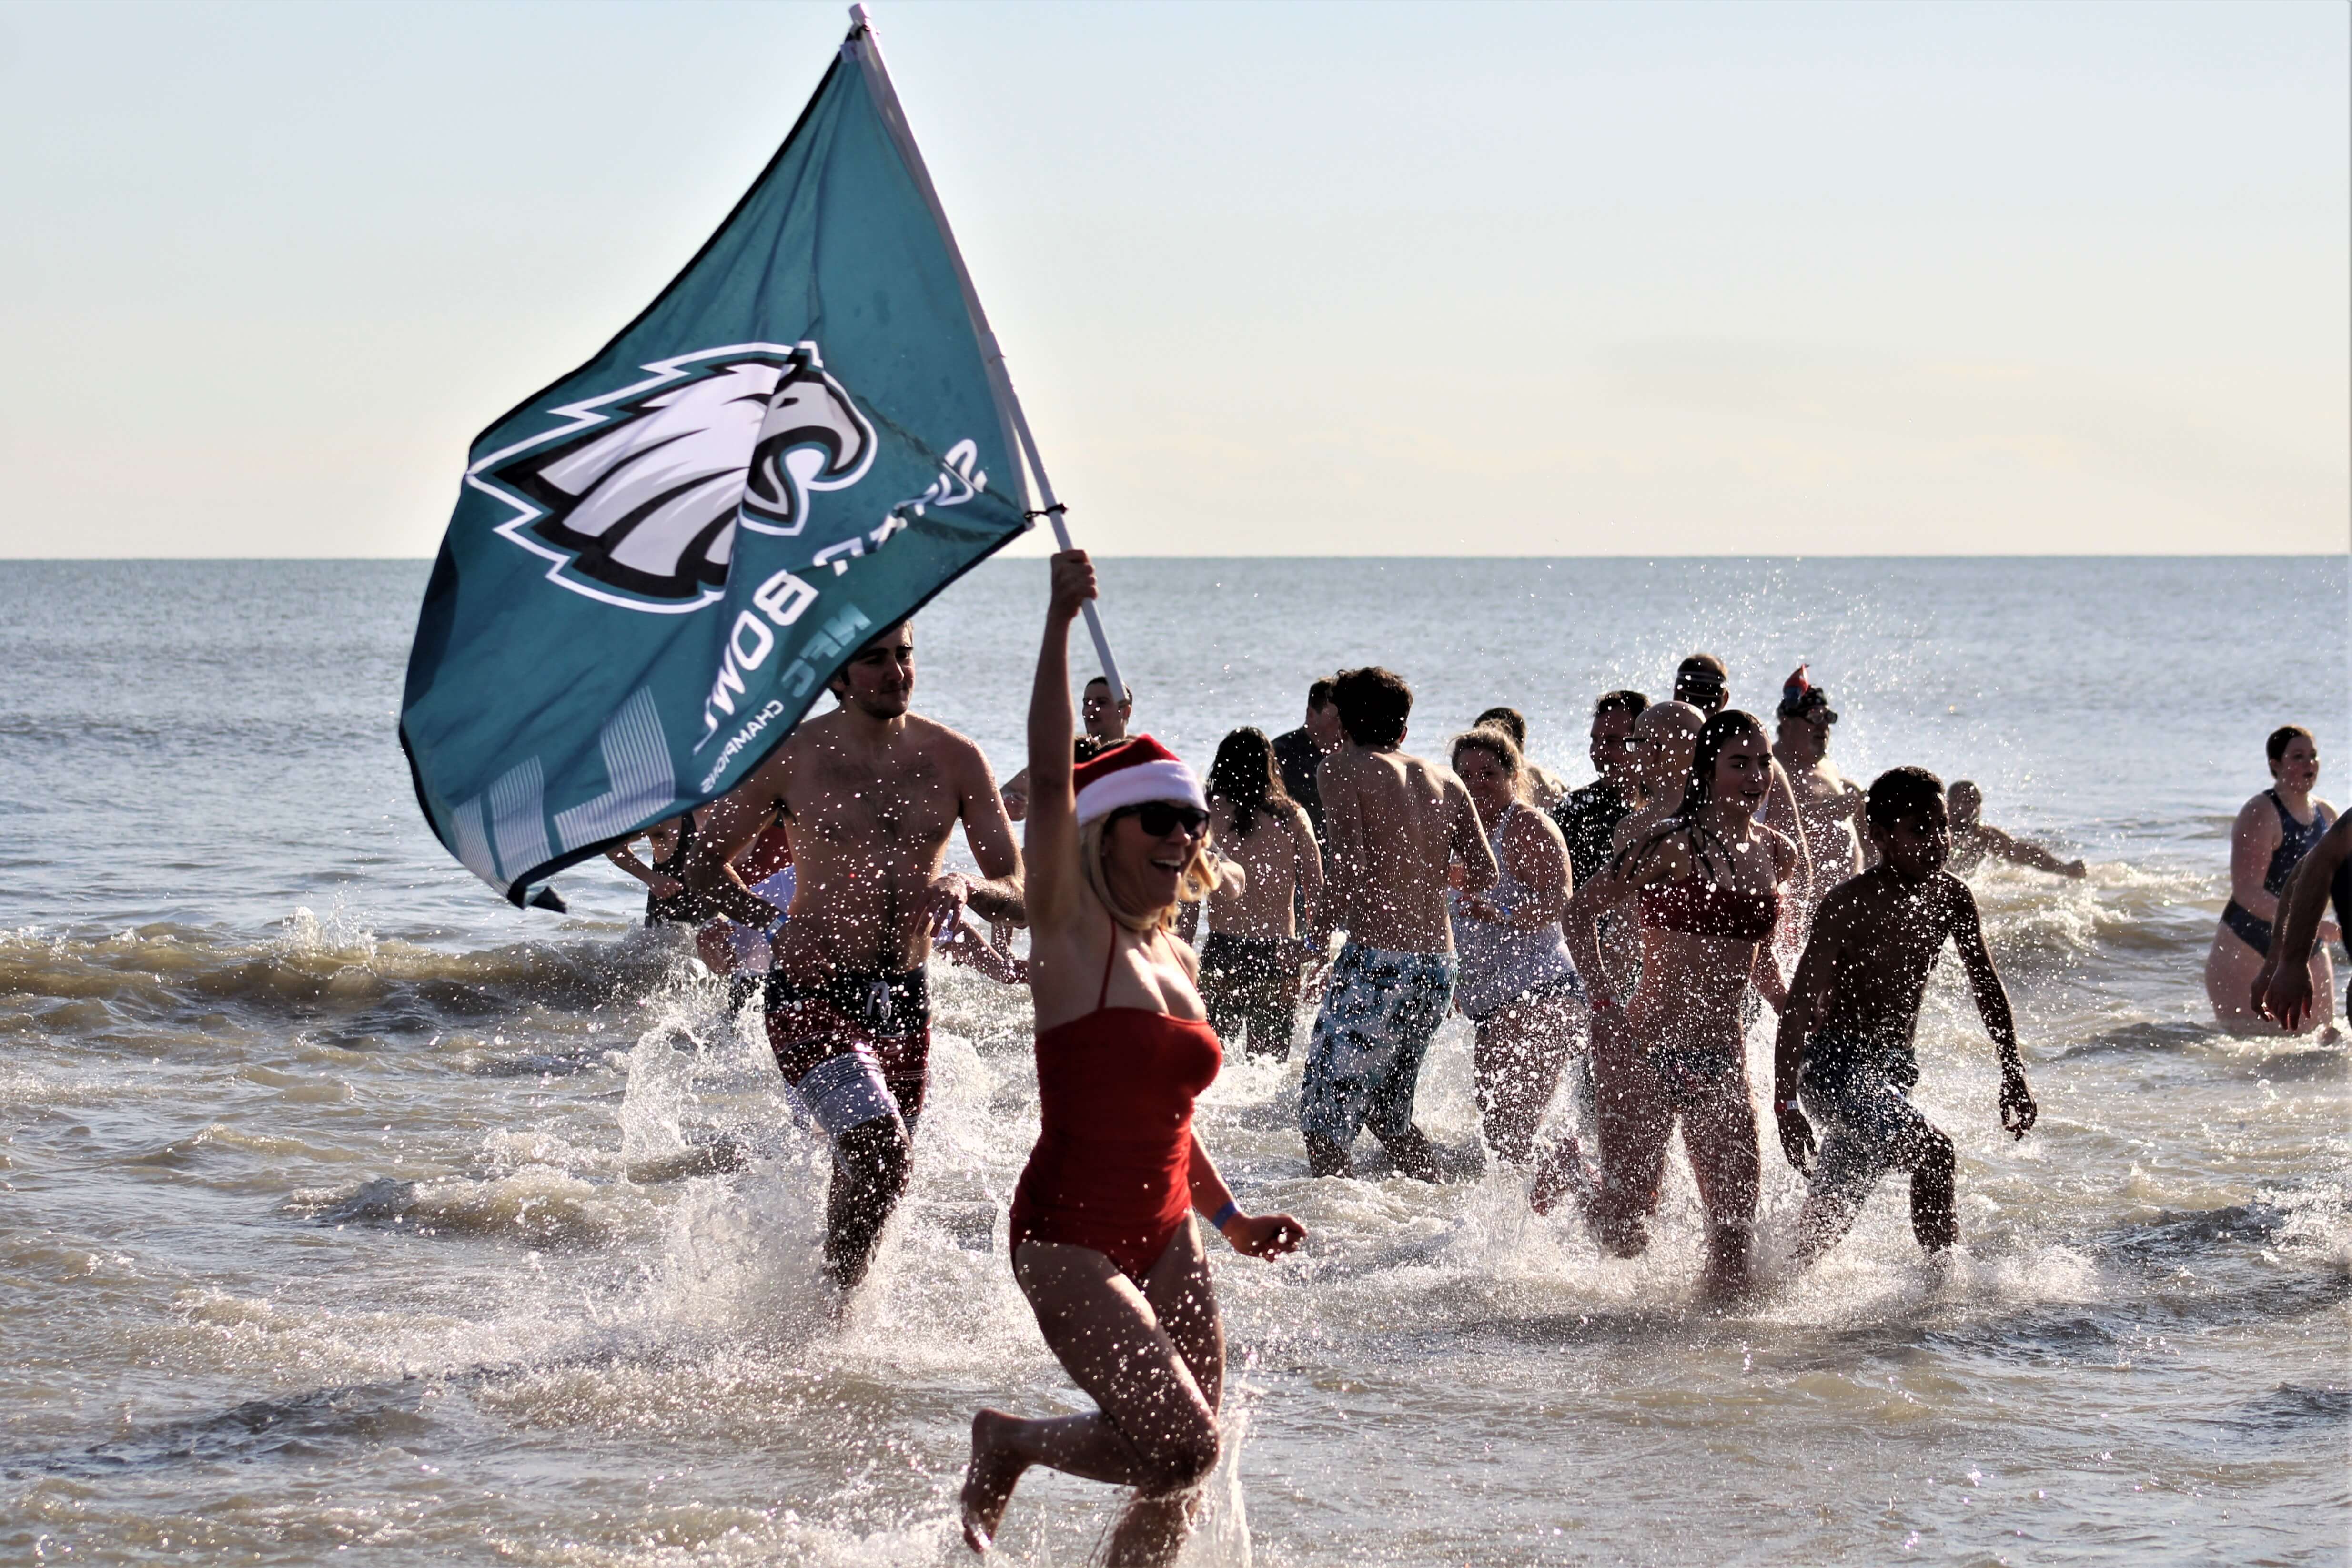 Hundreds braved cold ocean water to ring in the New Year